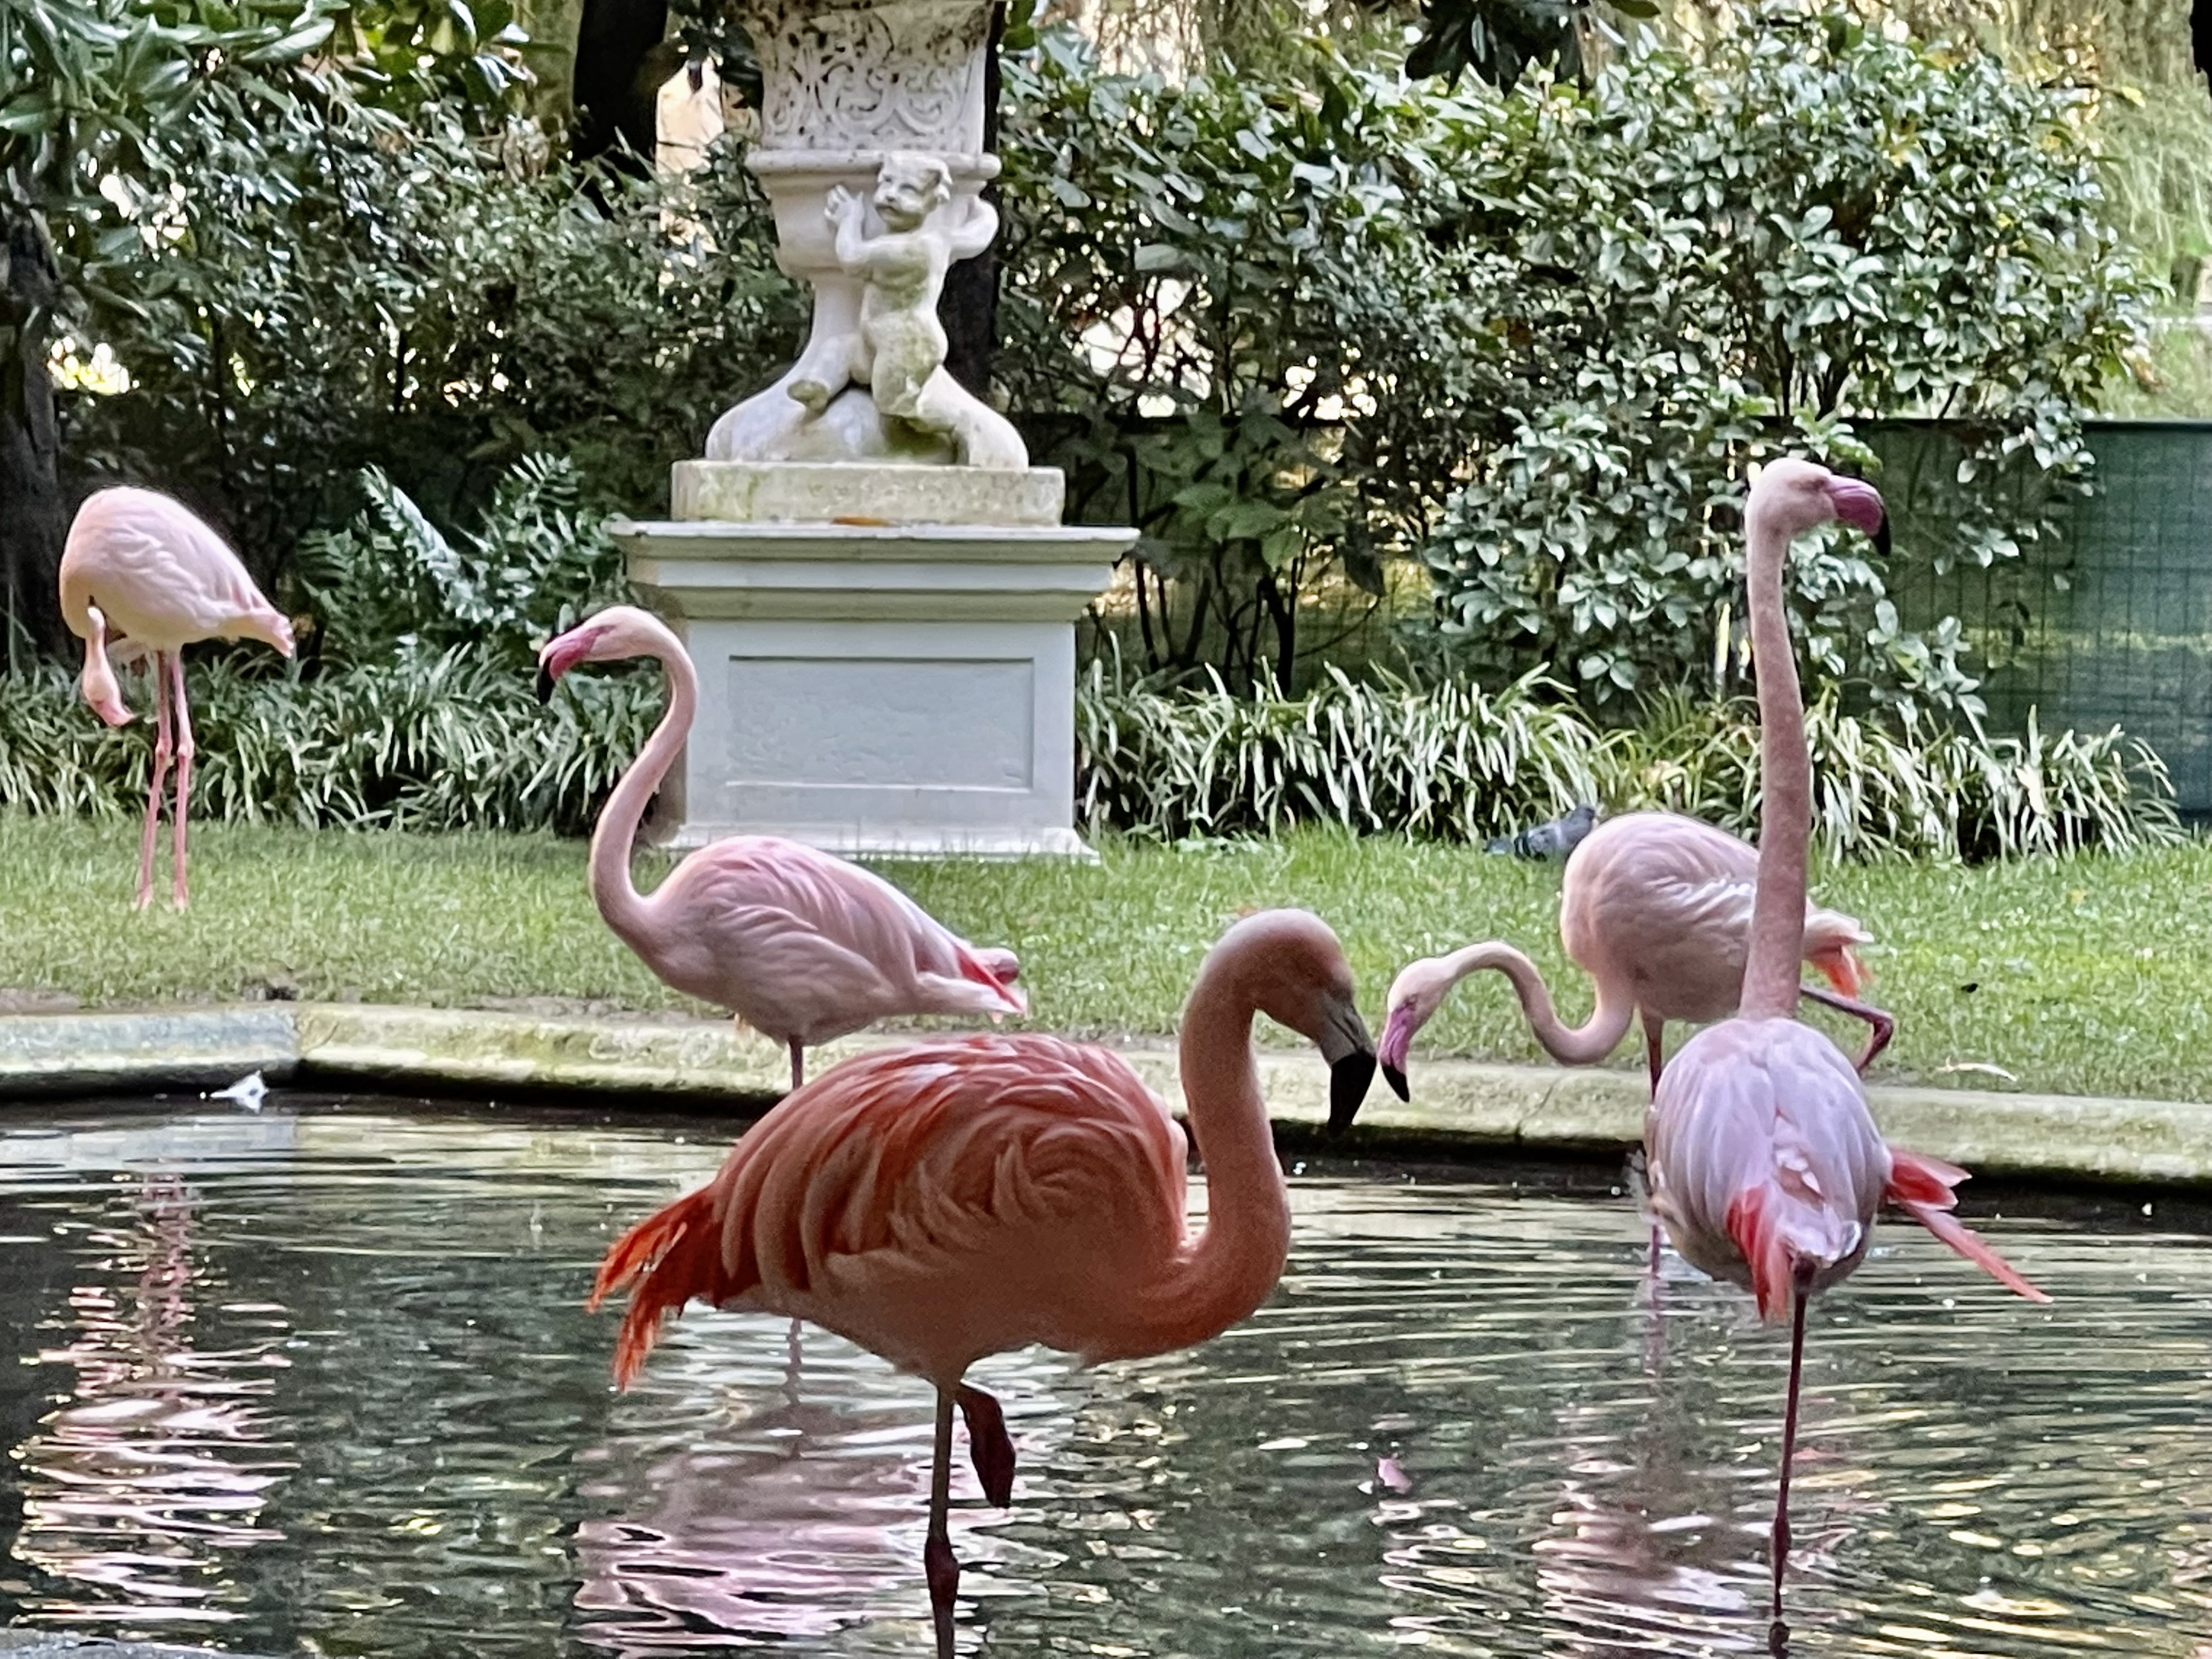 Make a pit stop at the secret garden of Palazzo Invernizzi to spy its pink flamingos